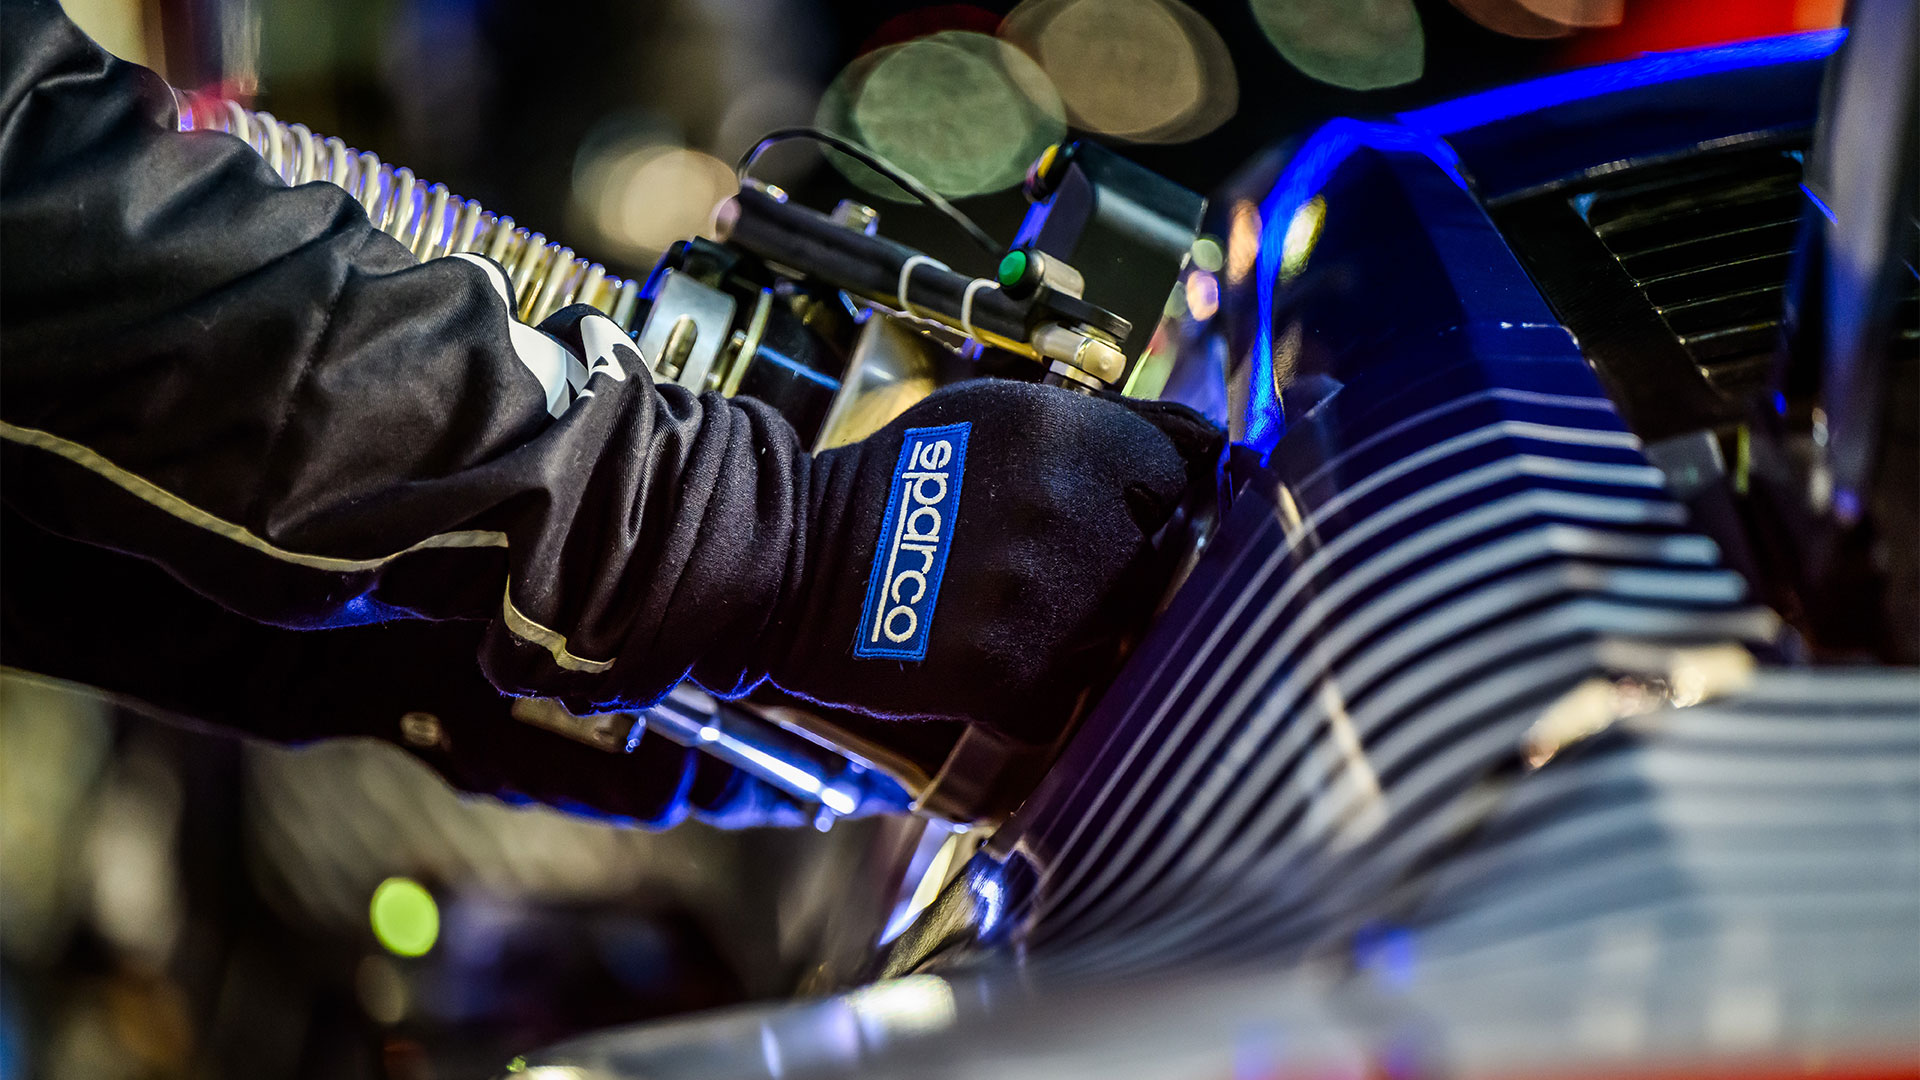 Sparco gloves